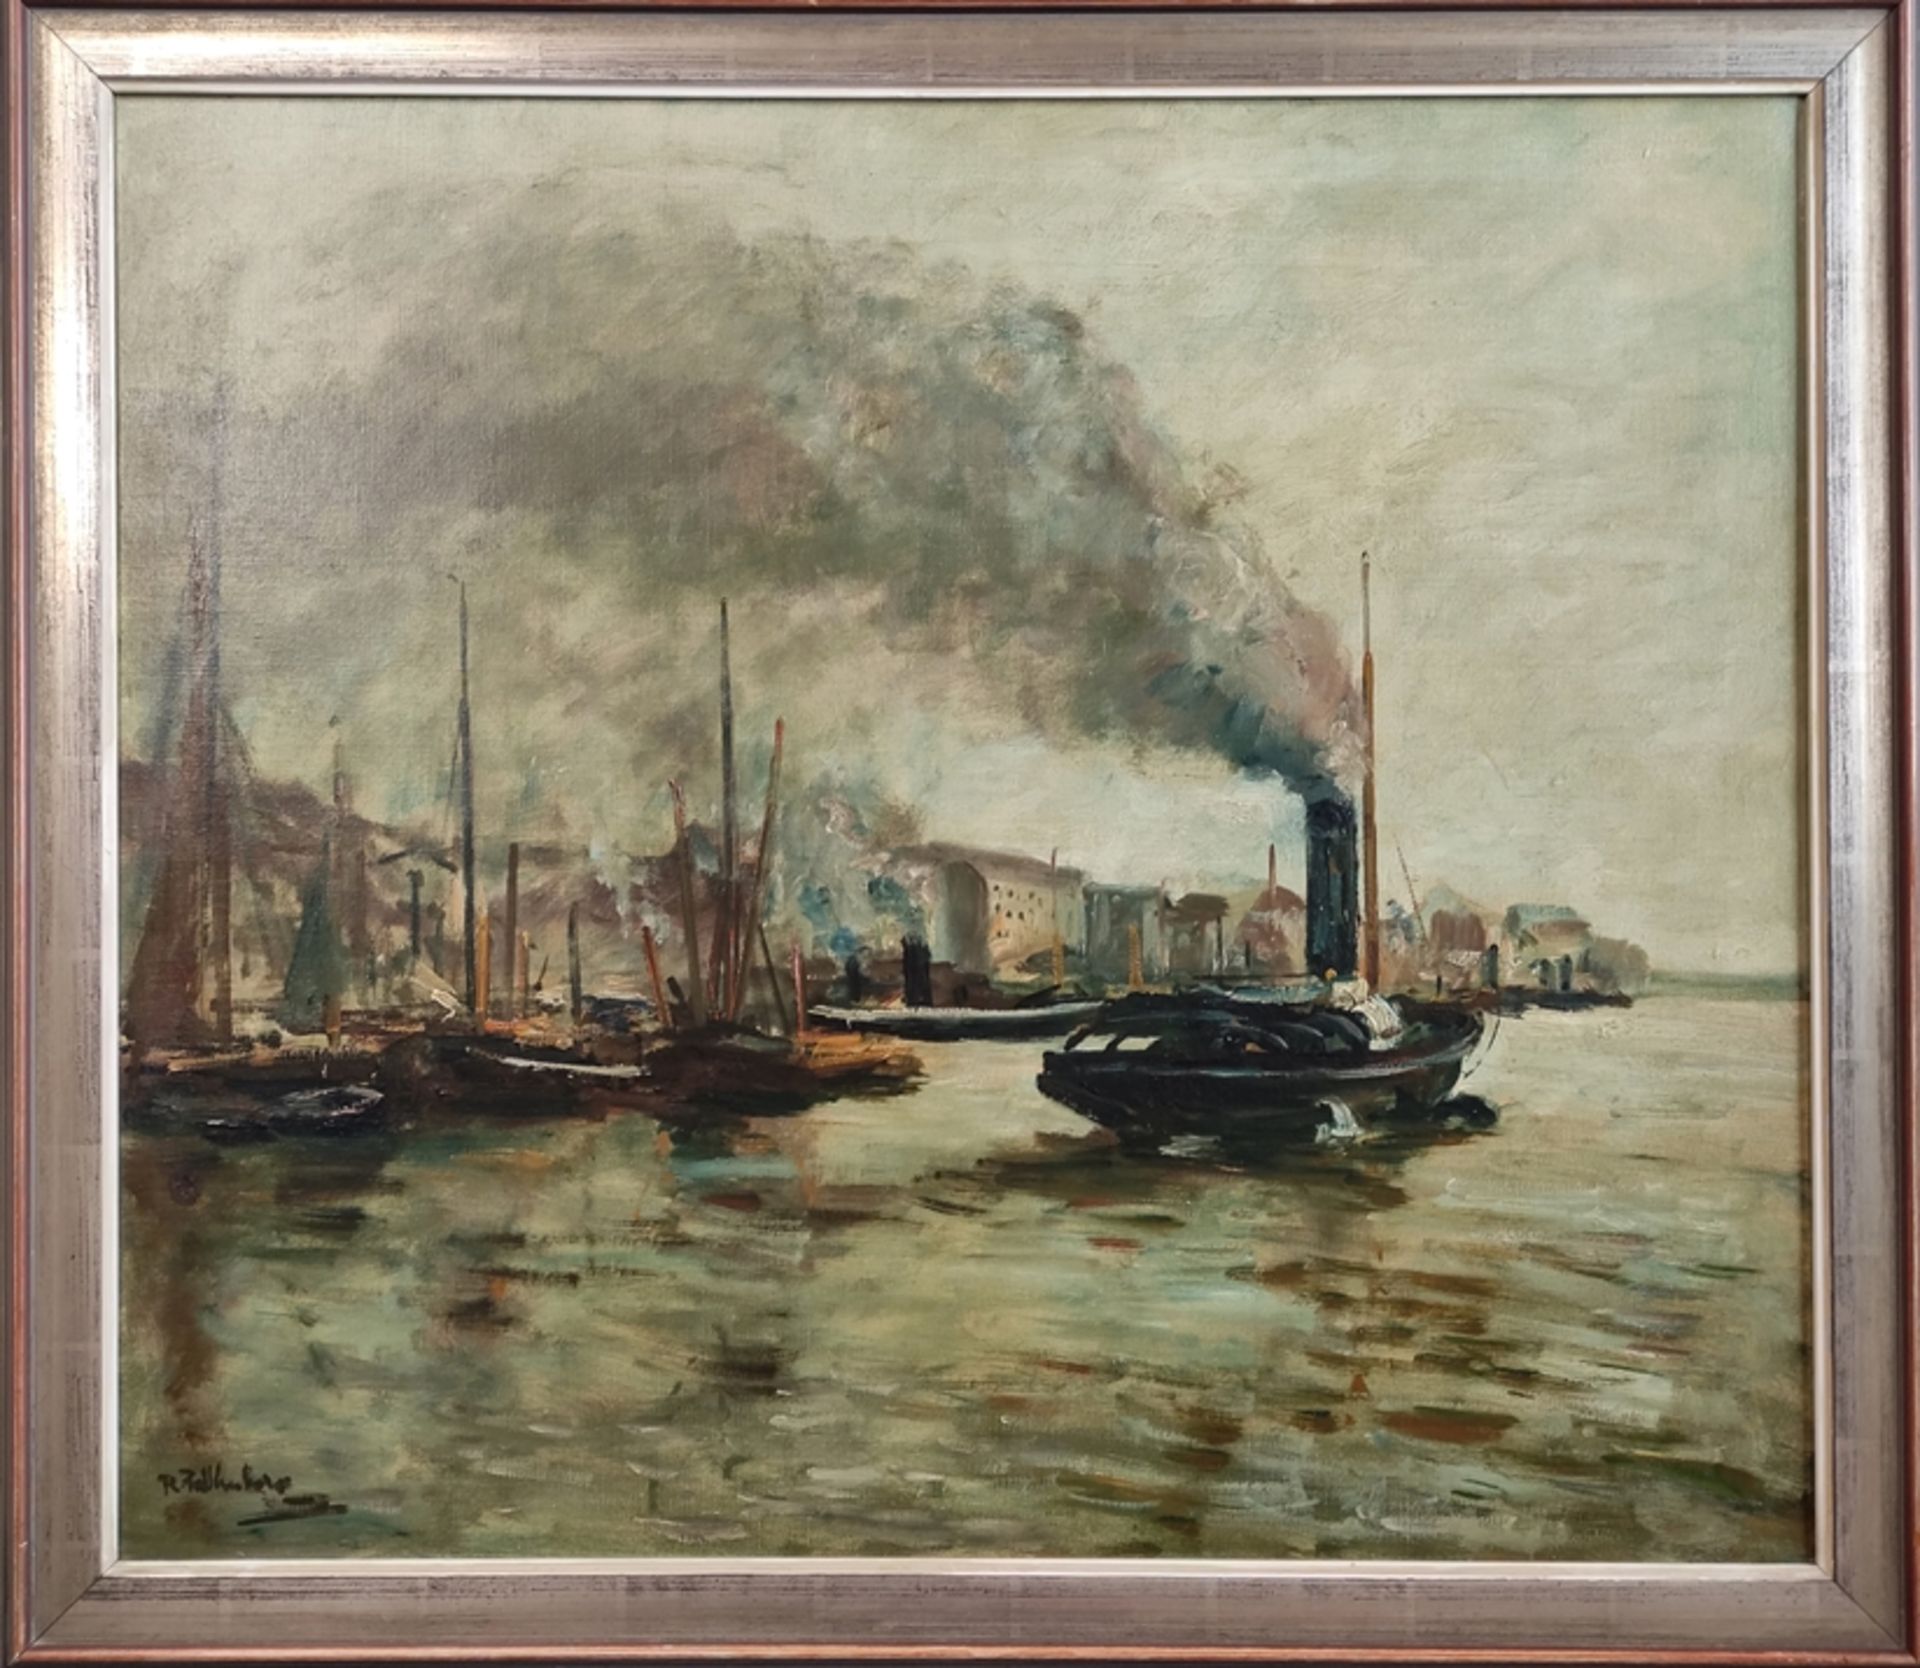 Falkenberg, Richard (1875 - 1945) "Steamboat in the Harbour", oil on canvas, signed on the lower le - Image 2 of 4